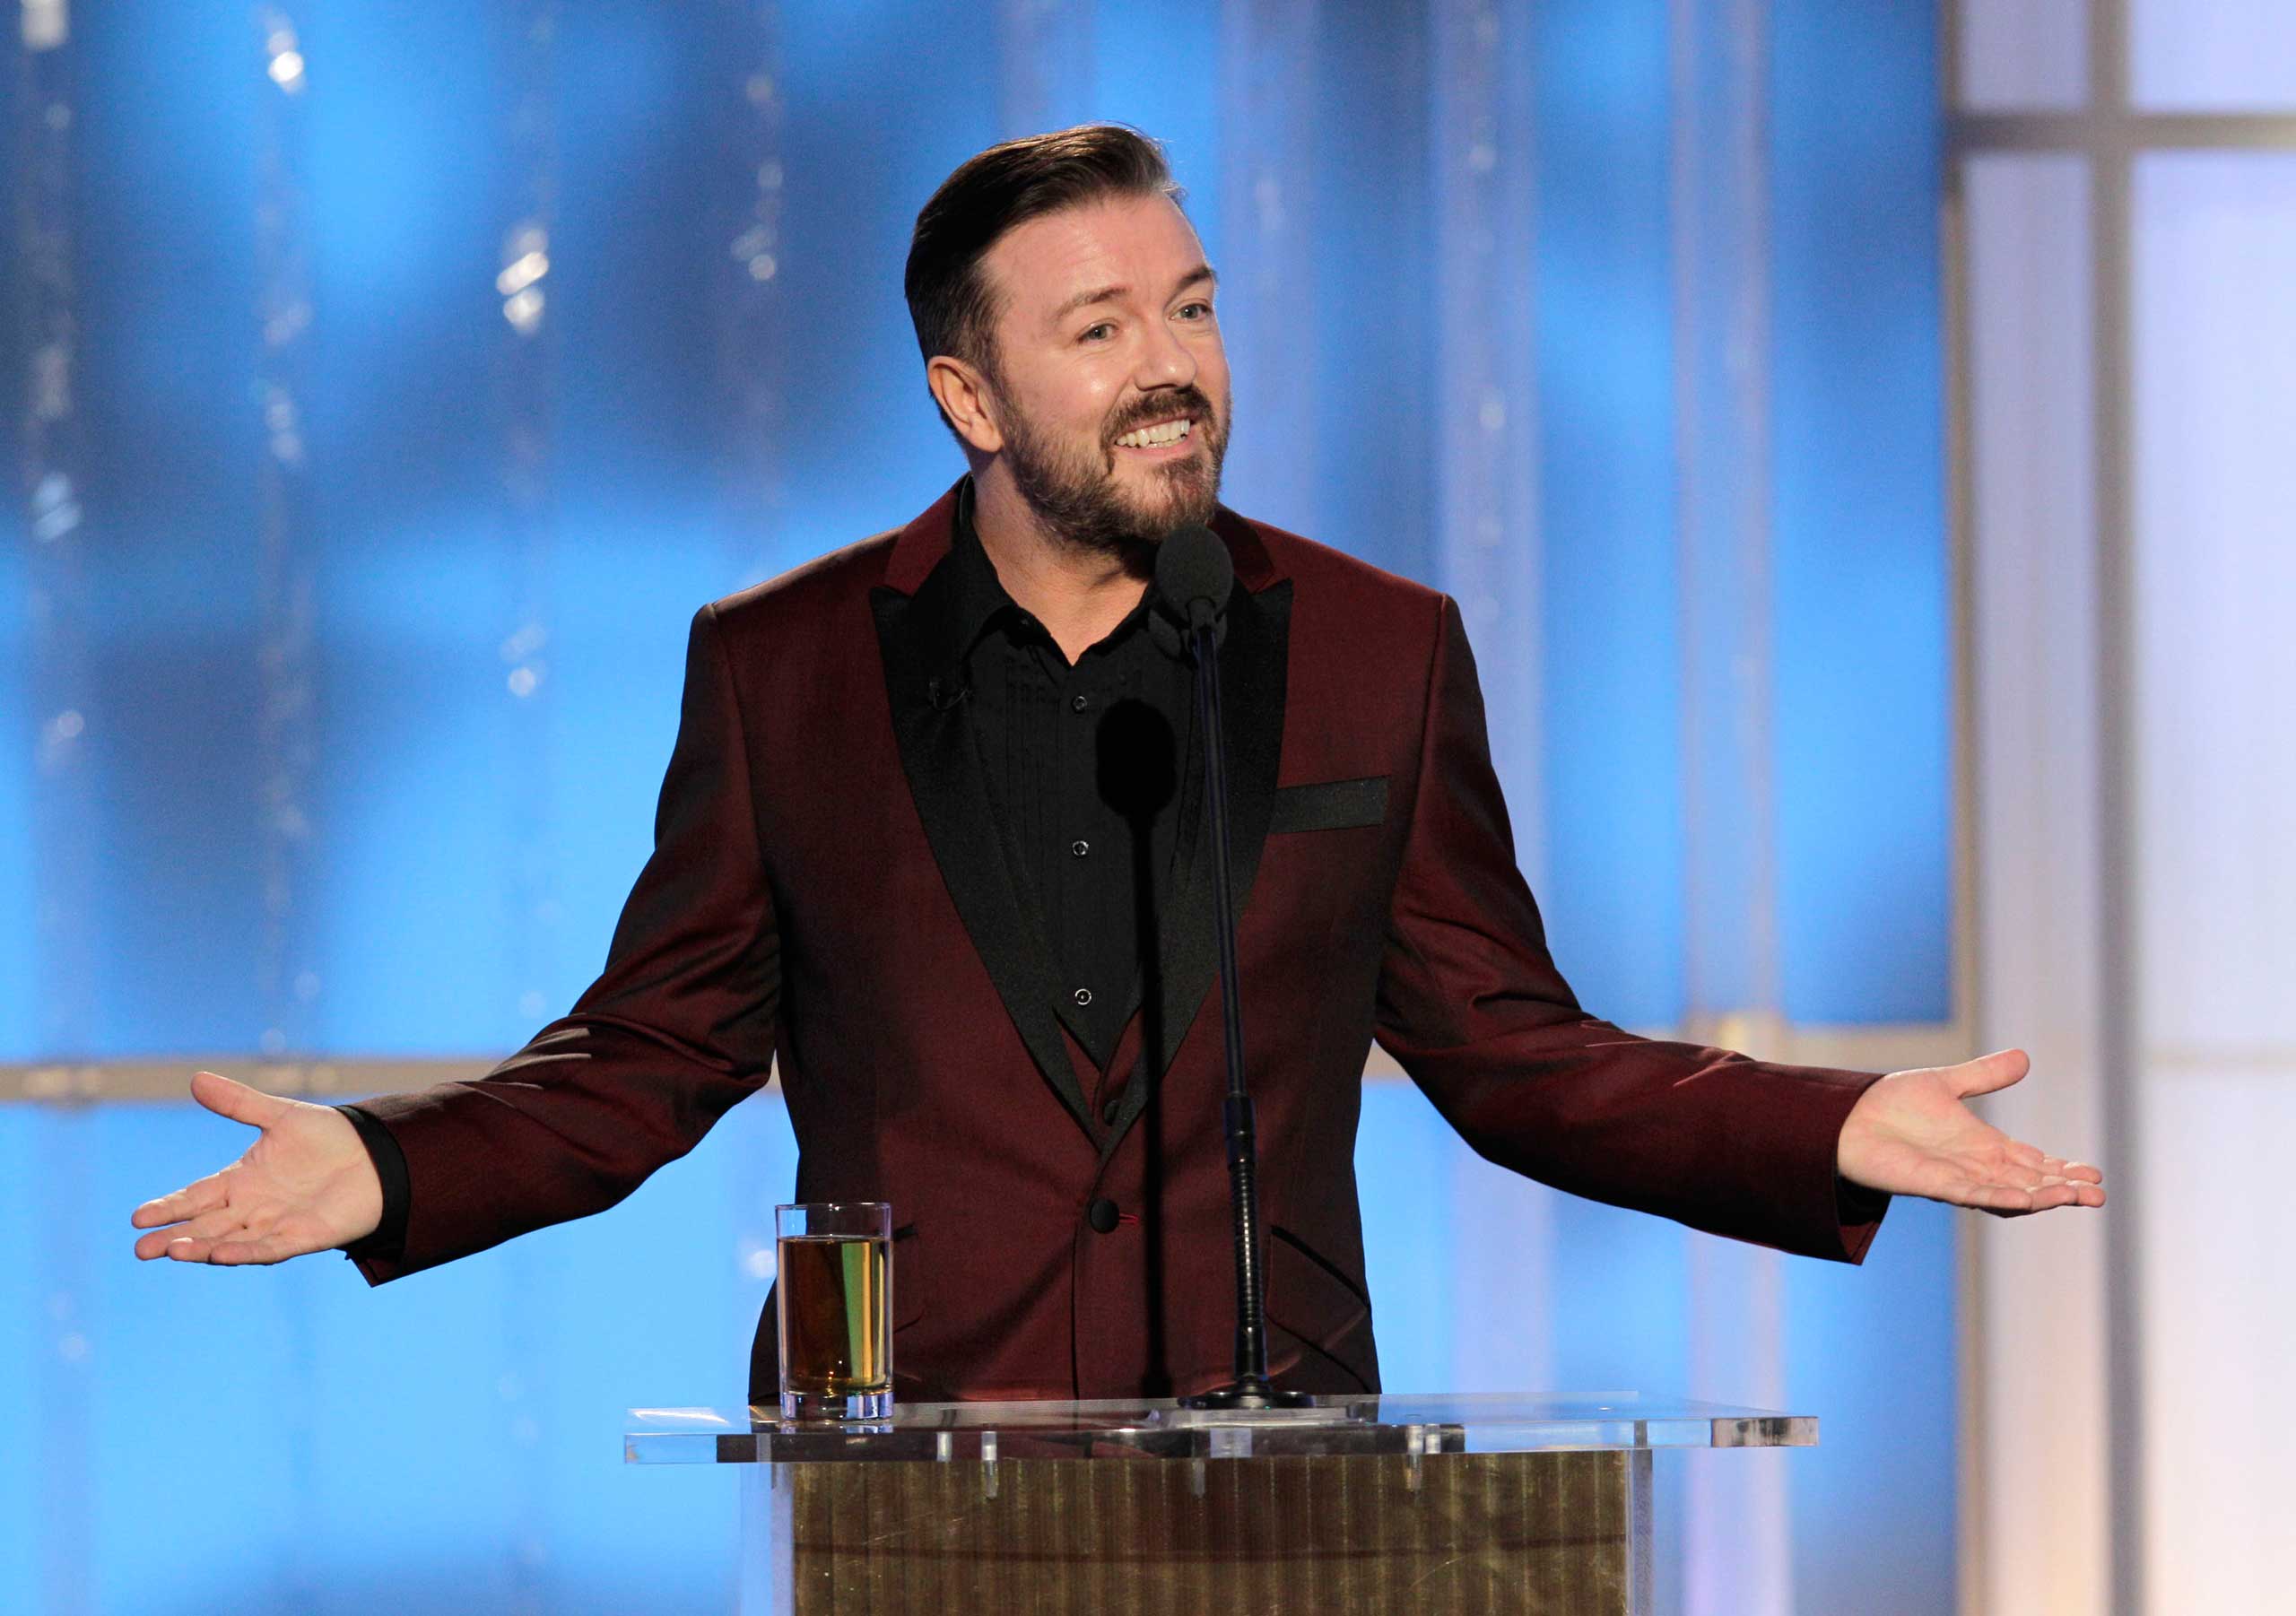 Ricky Gervais onstage during Golden Globe Awards in 2012. (Paul Drinkwater—NBC/Getty Images)